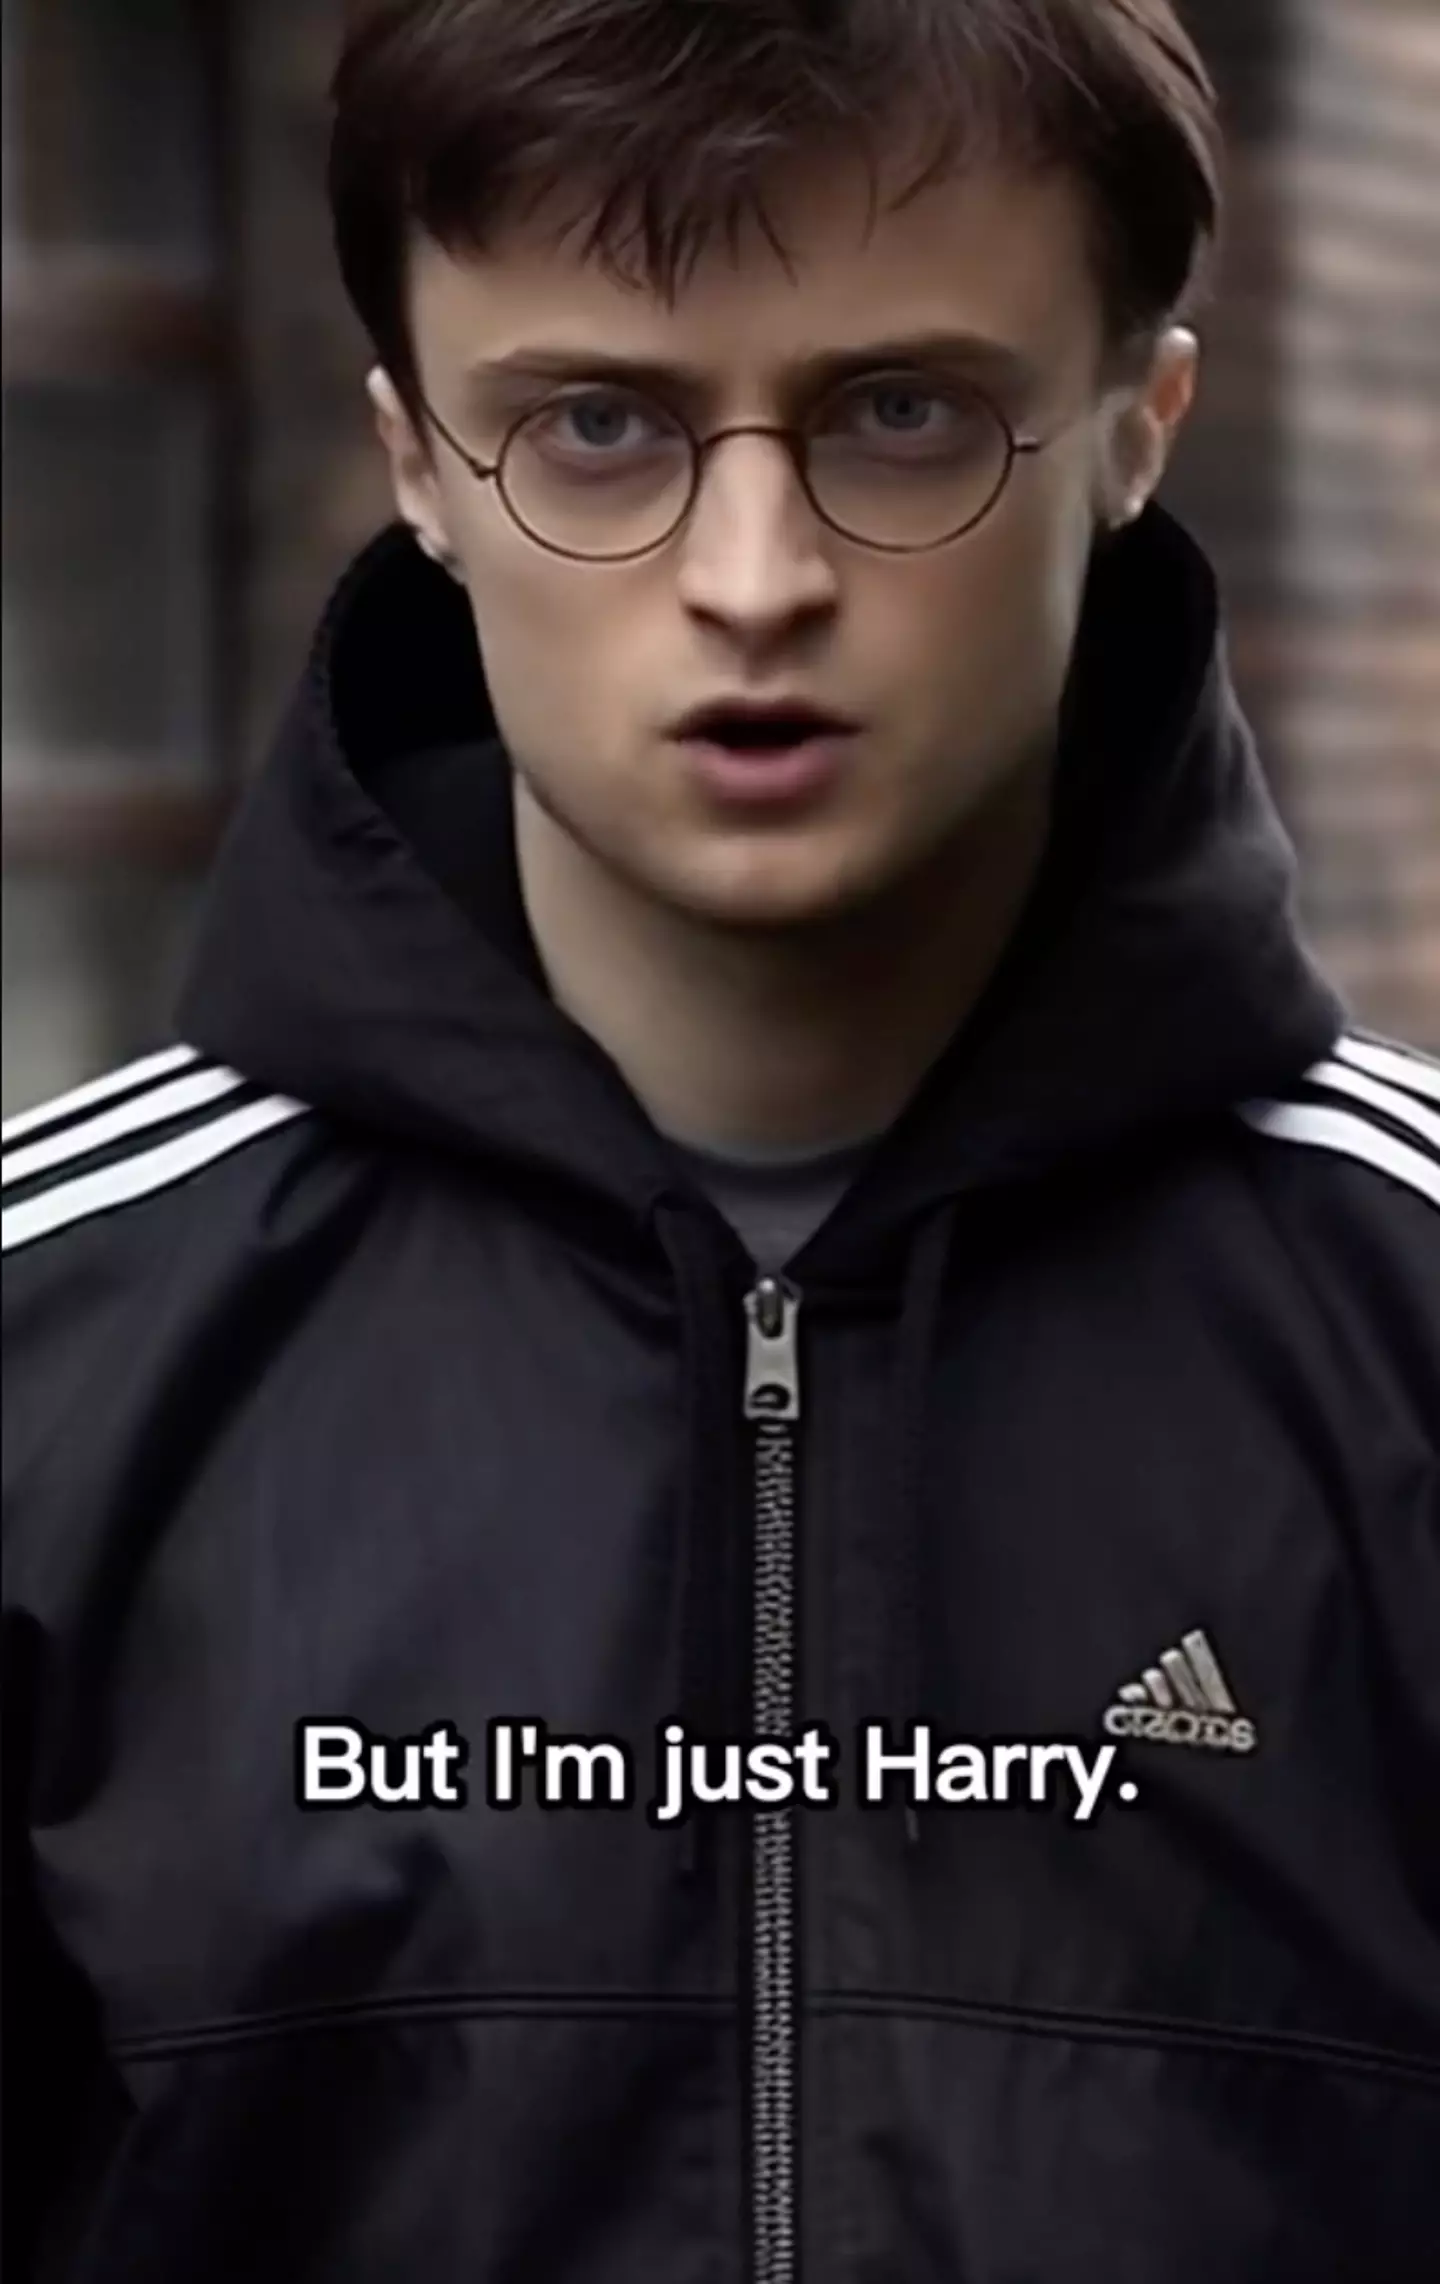 The video covers parts of Harry Potter and the Philosopher's Stone - but in Poland.